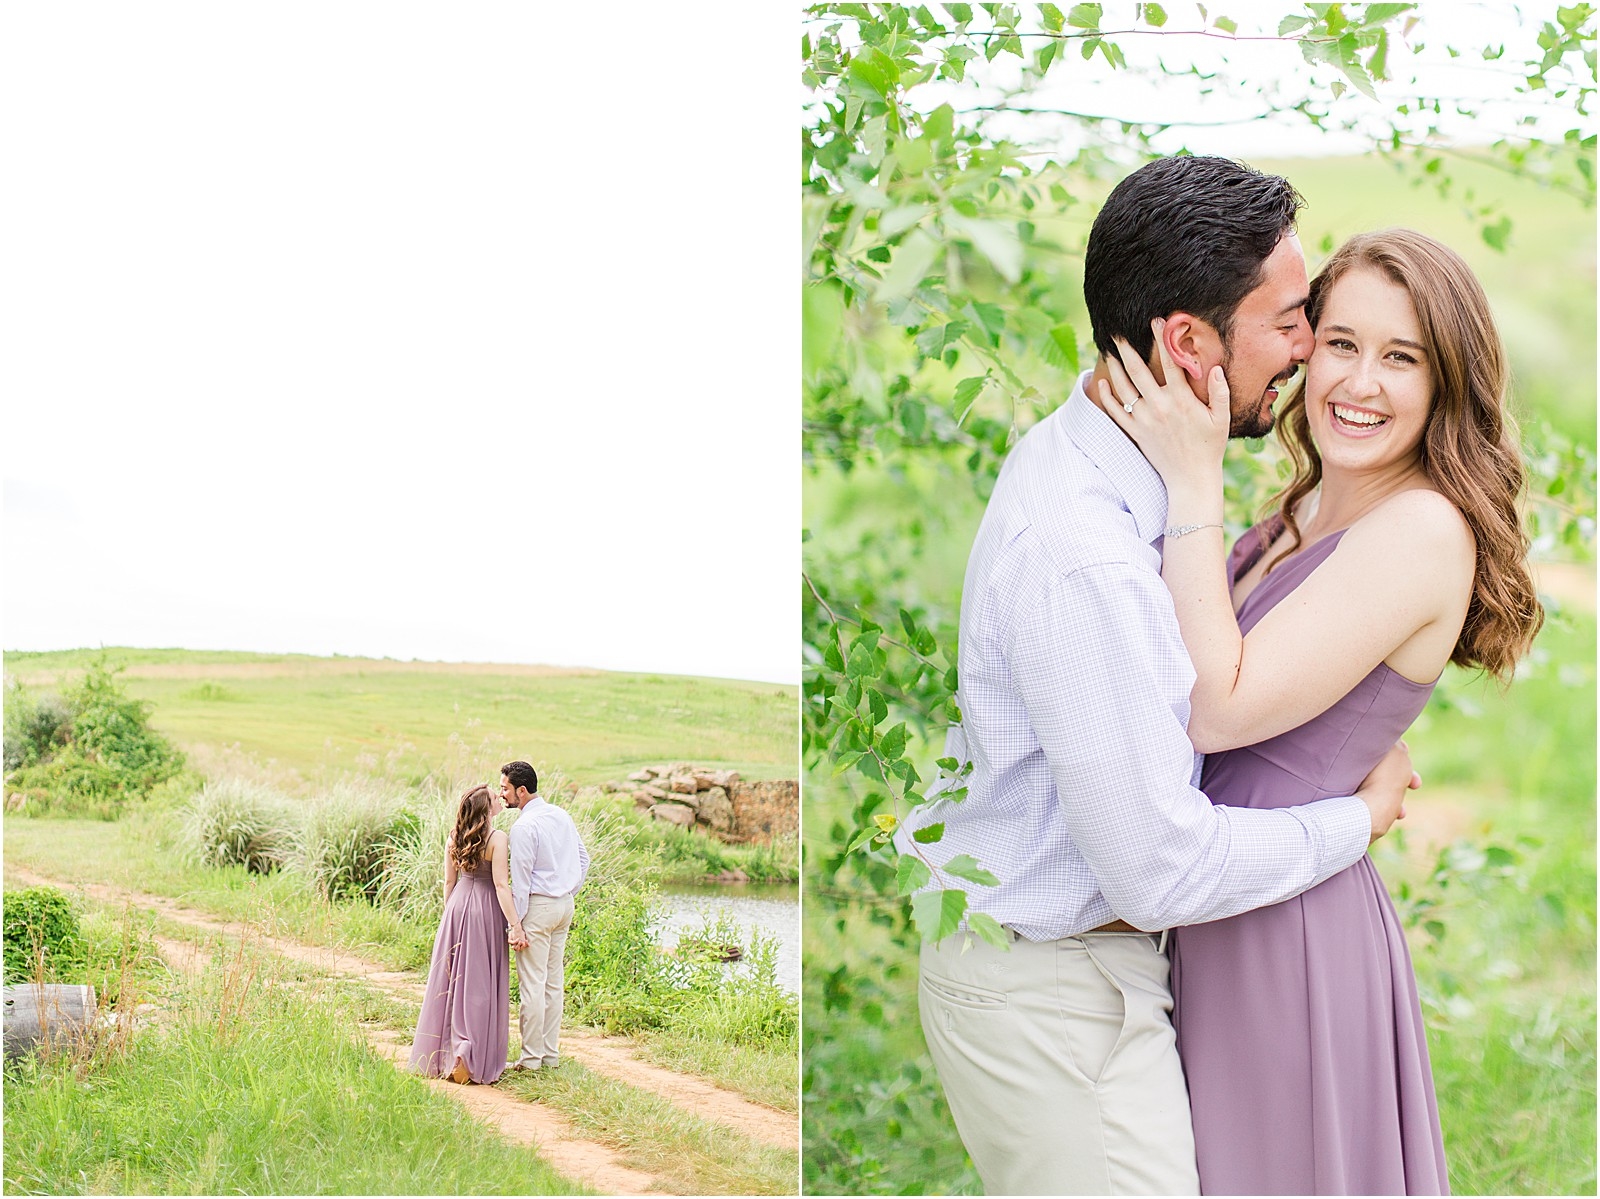 A Stone Tower Winery Leesburgh Engagement Session | Caitlin and Jason 009.jpg